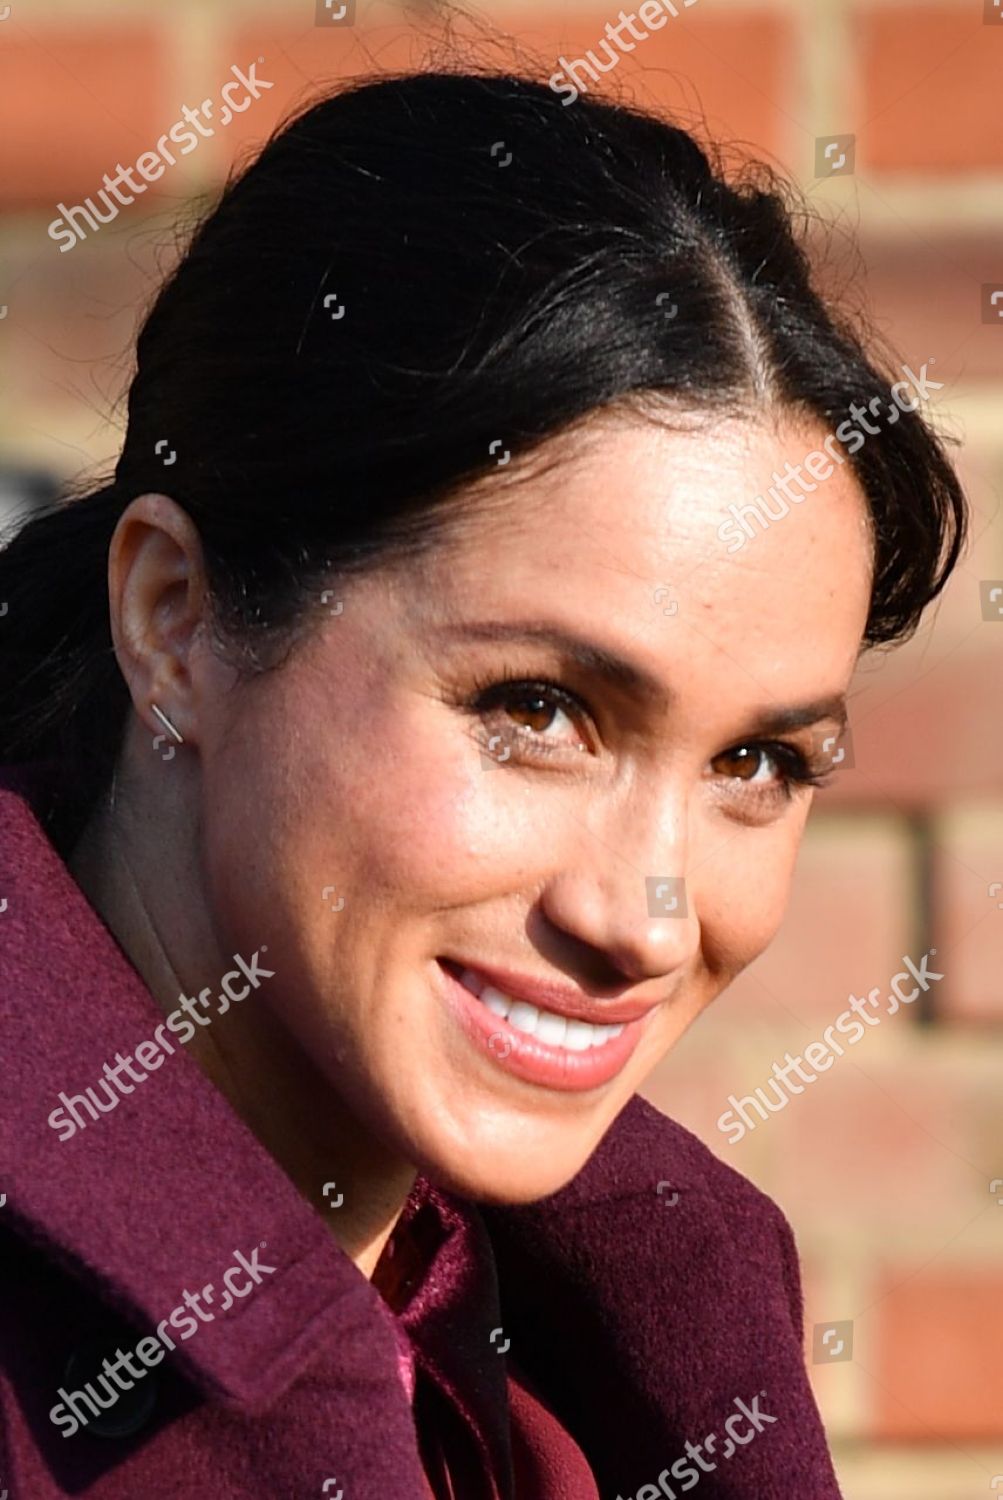 meghan-duchess-of-sussex-visit-to-the-hubb-community-kitchen-london-uk-shutterstock-editorial-9988841ao.jpg